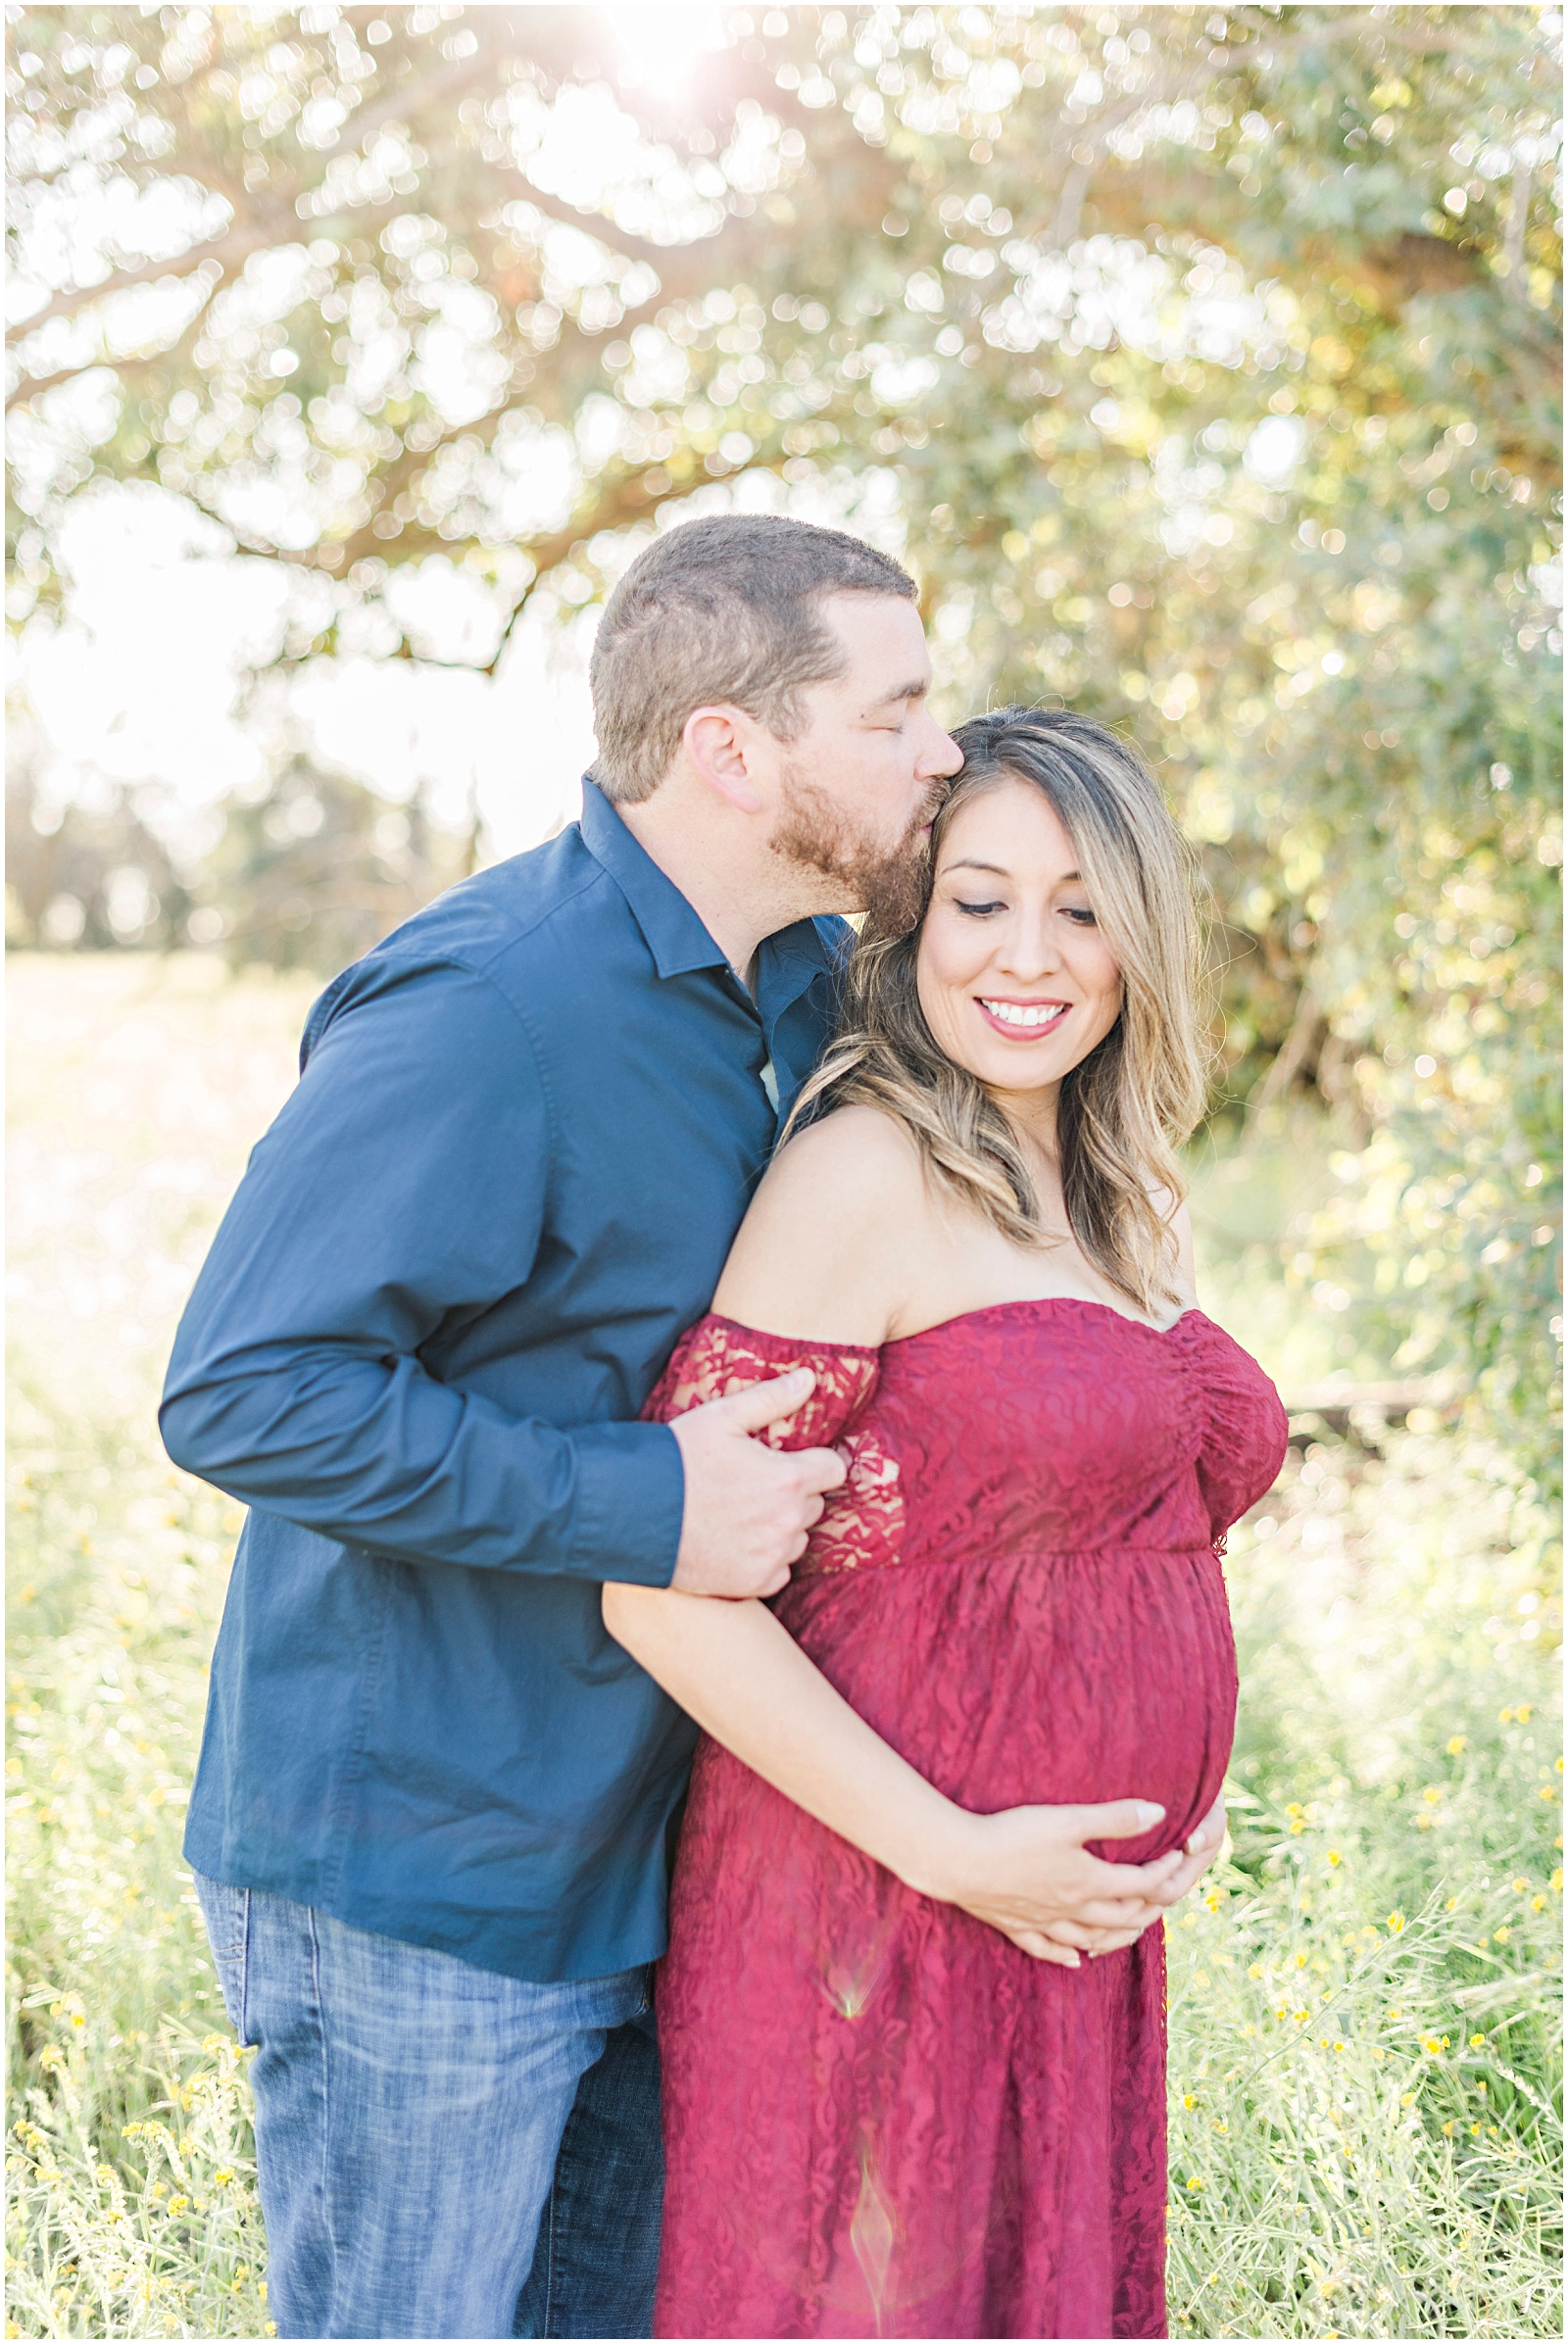 Rancho Cucamonga Maternity Session by Mollie Jane Photography. To see more go to www.molliejanephotography.com